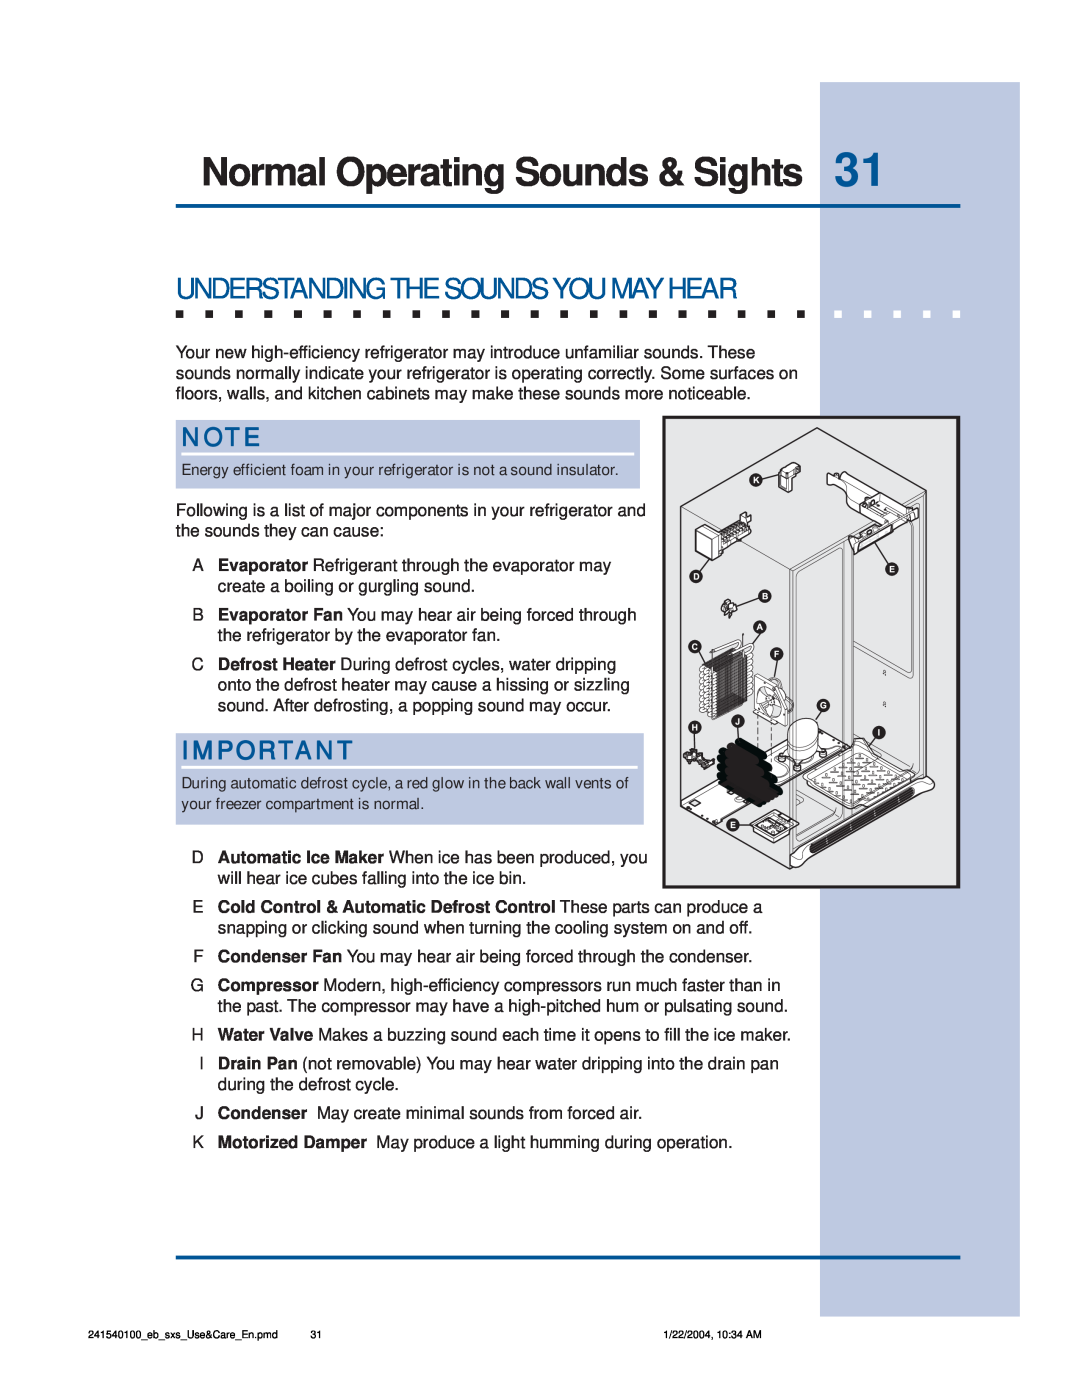 Frigidaire 241540100 (1203) manual Normal Operating Sounds & Sights, Understanding The Sounds You May Hear 